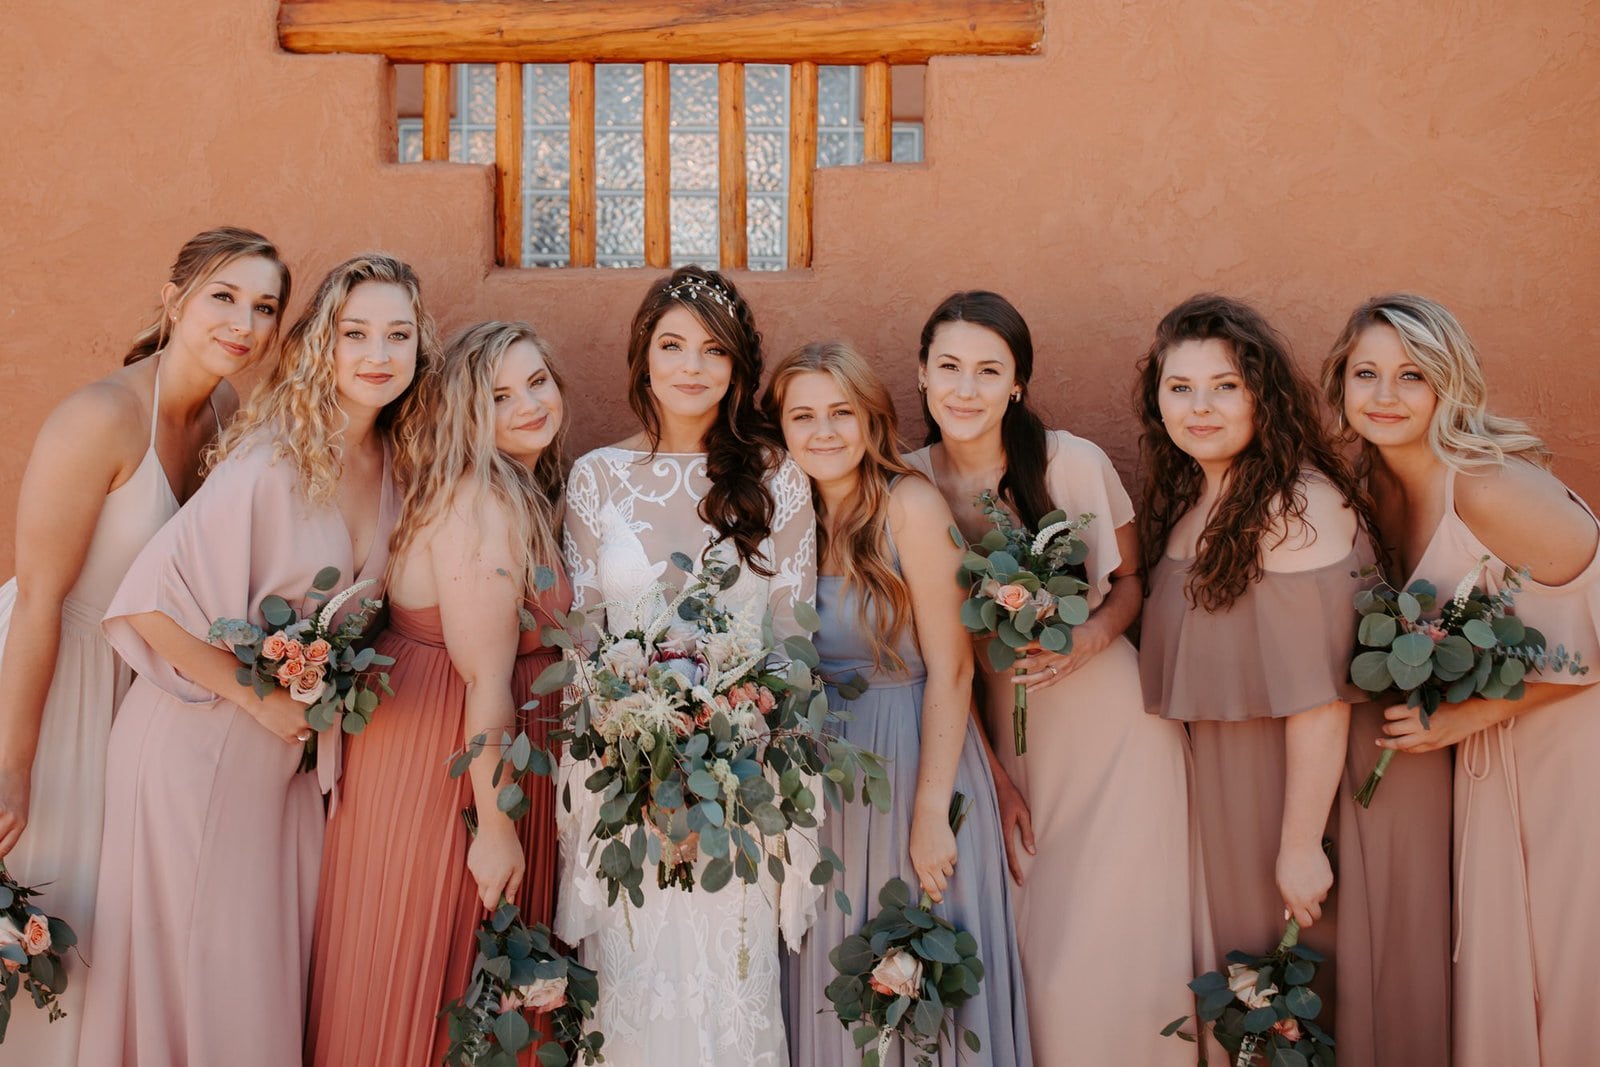 Detail shot of bride and her bridesmaids.